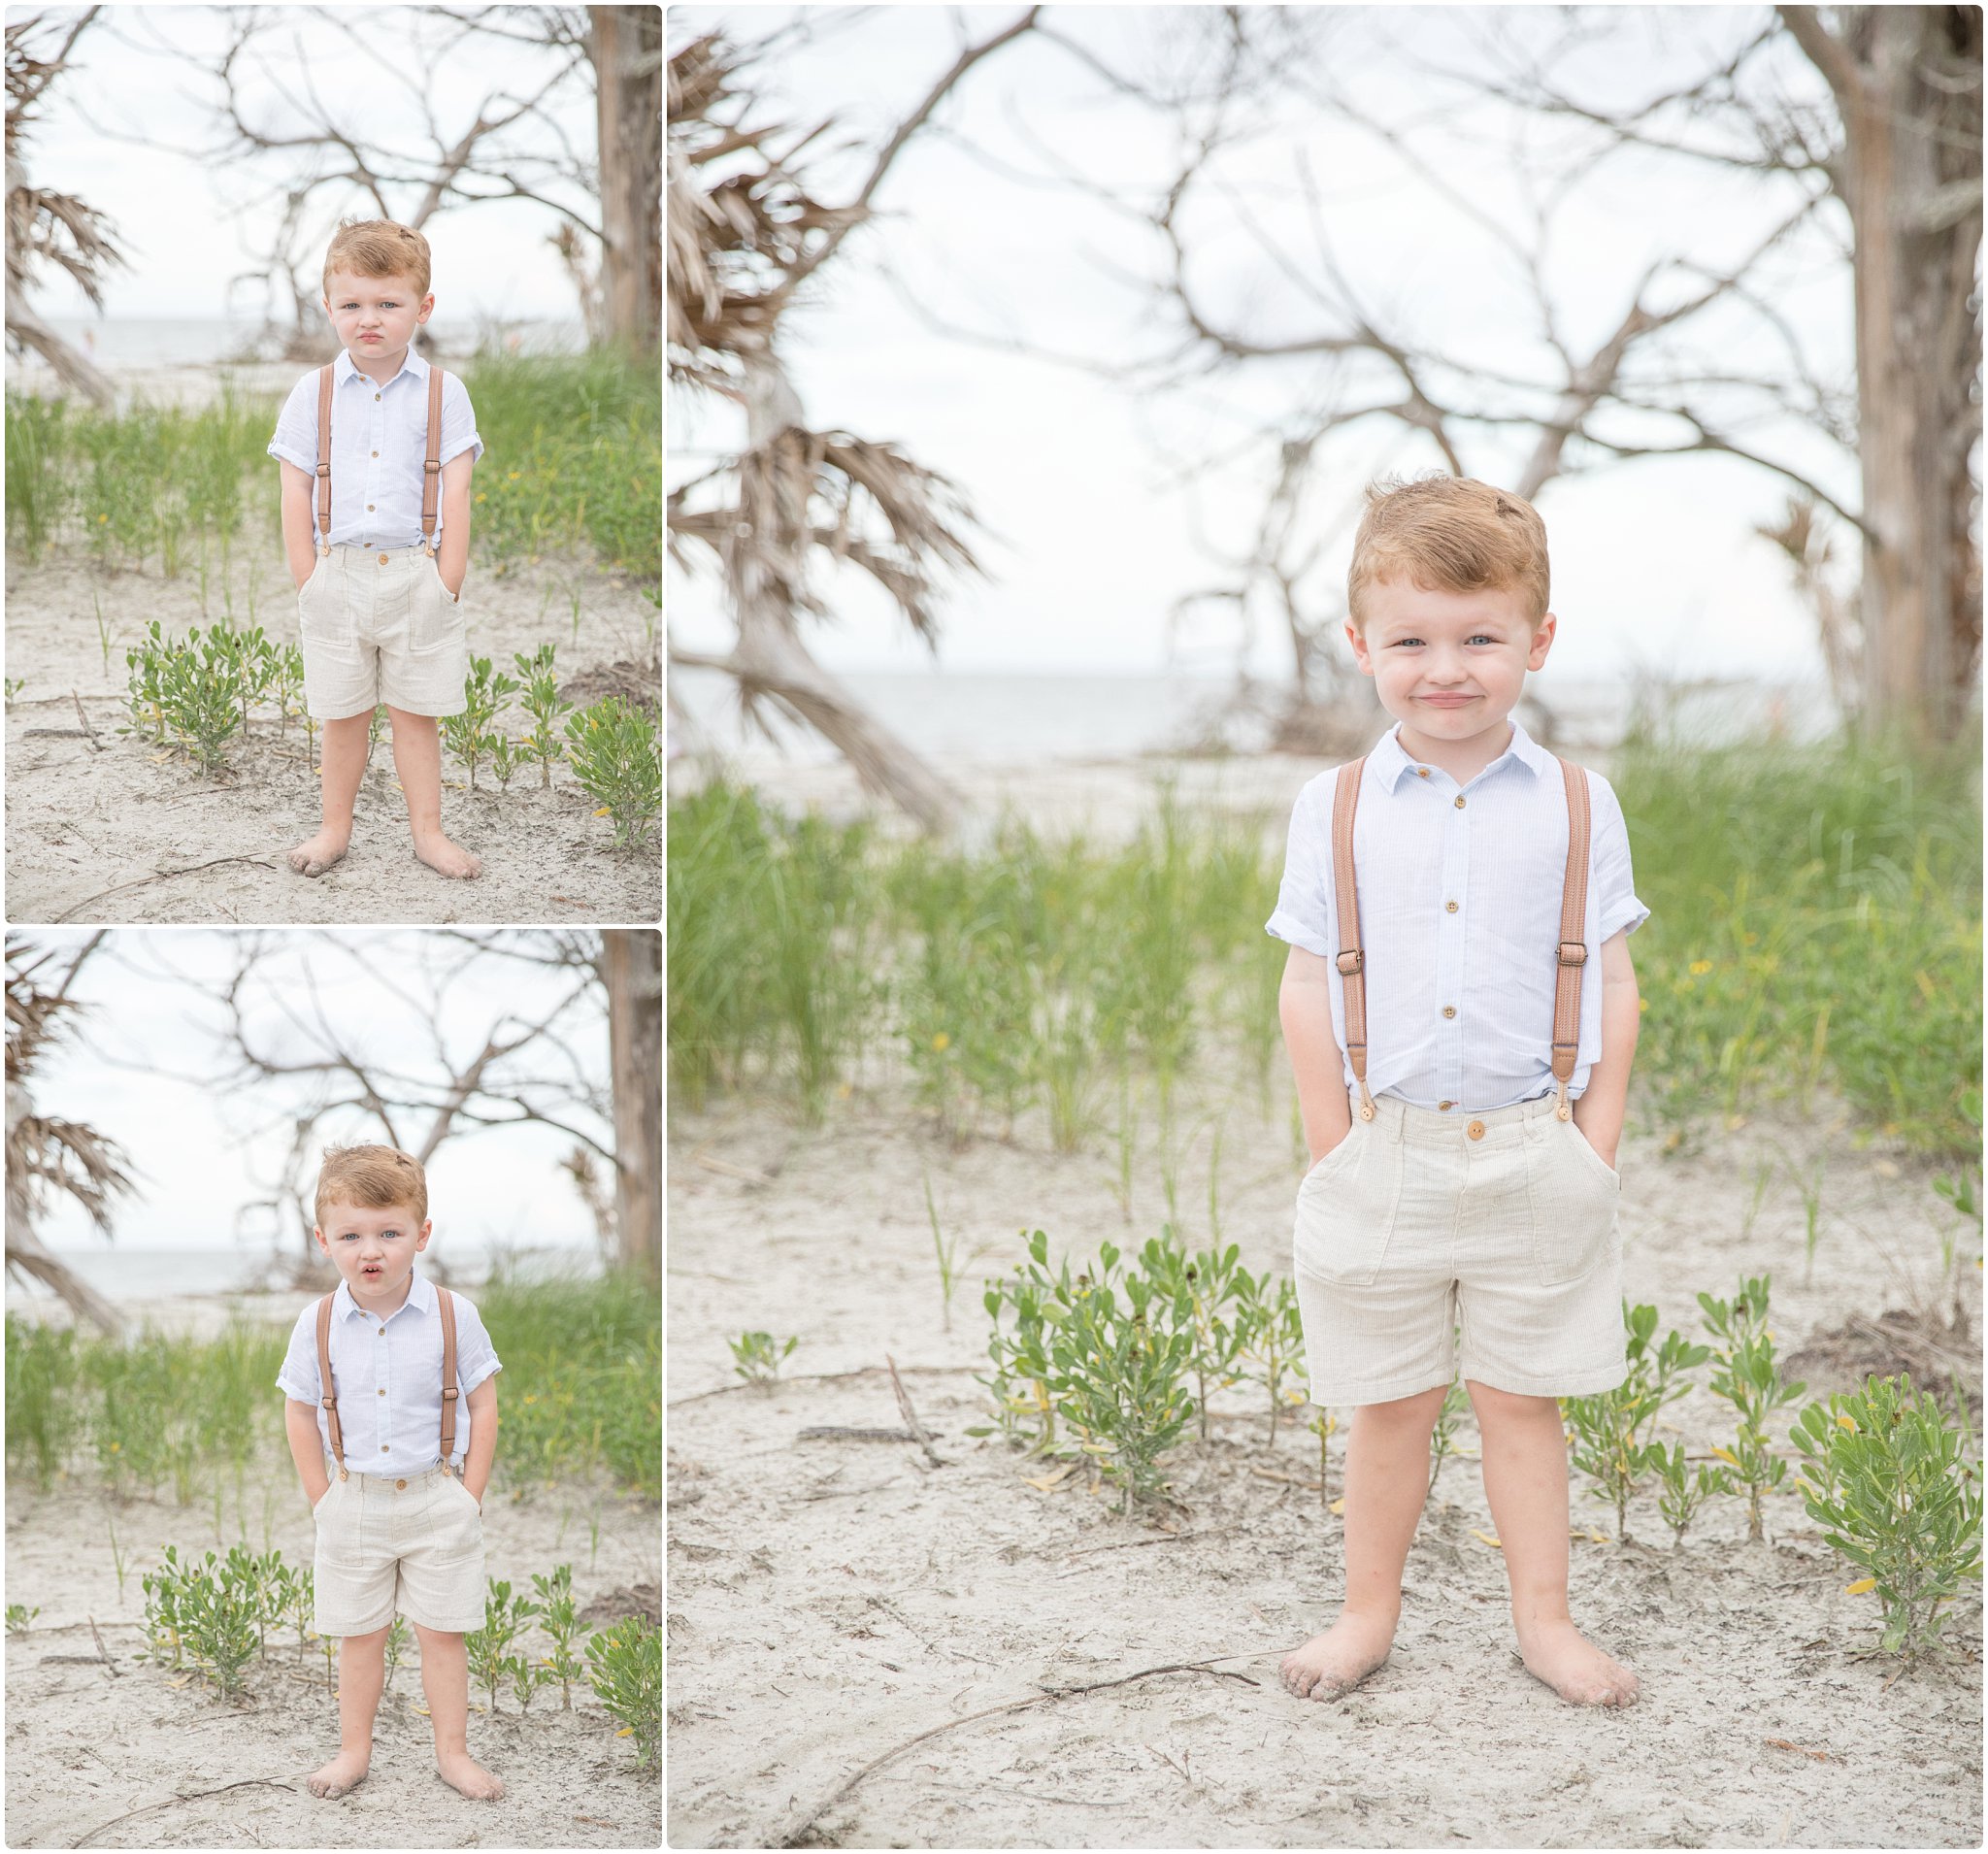 Candace hires photography | www.candacehiresphotography.com | jekyll island childrens session